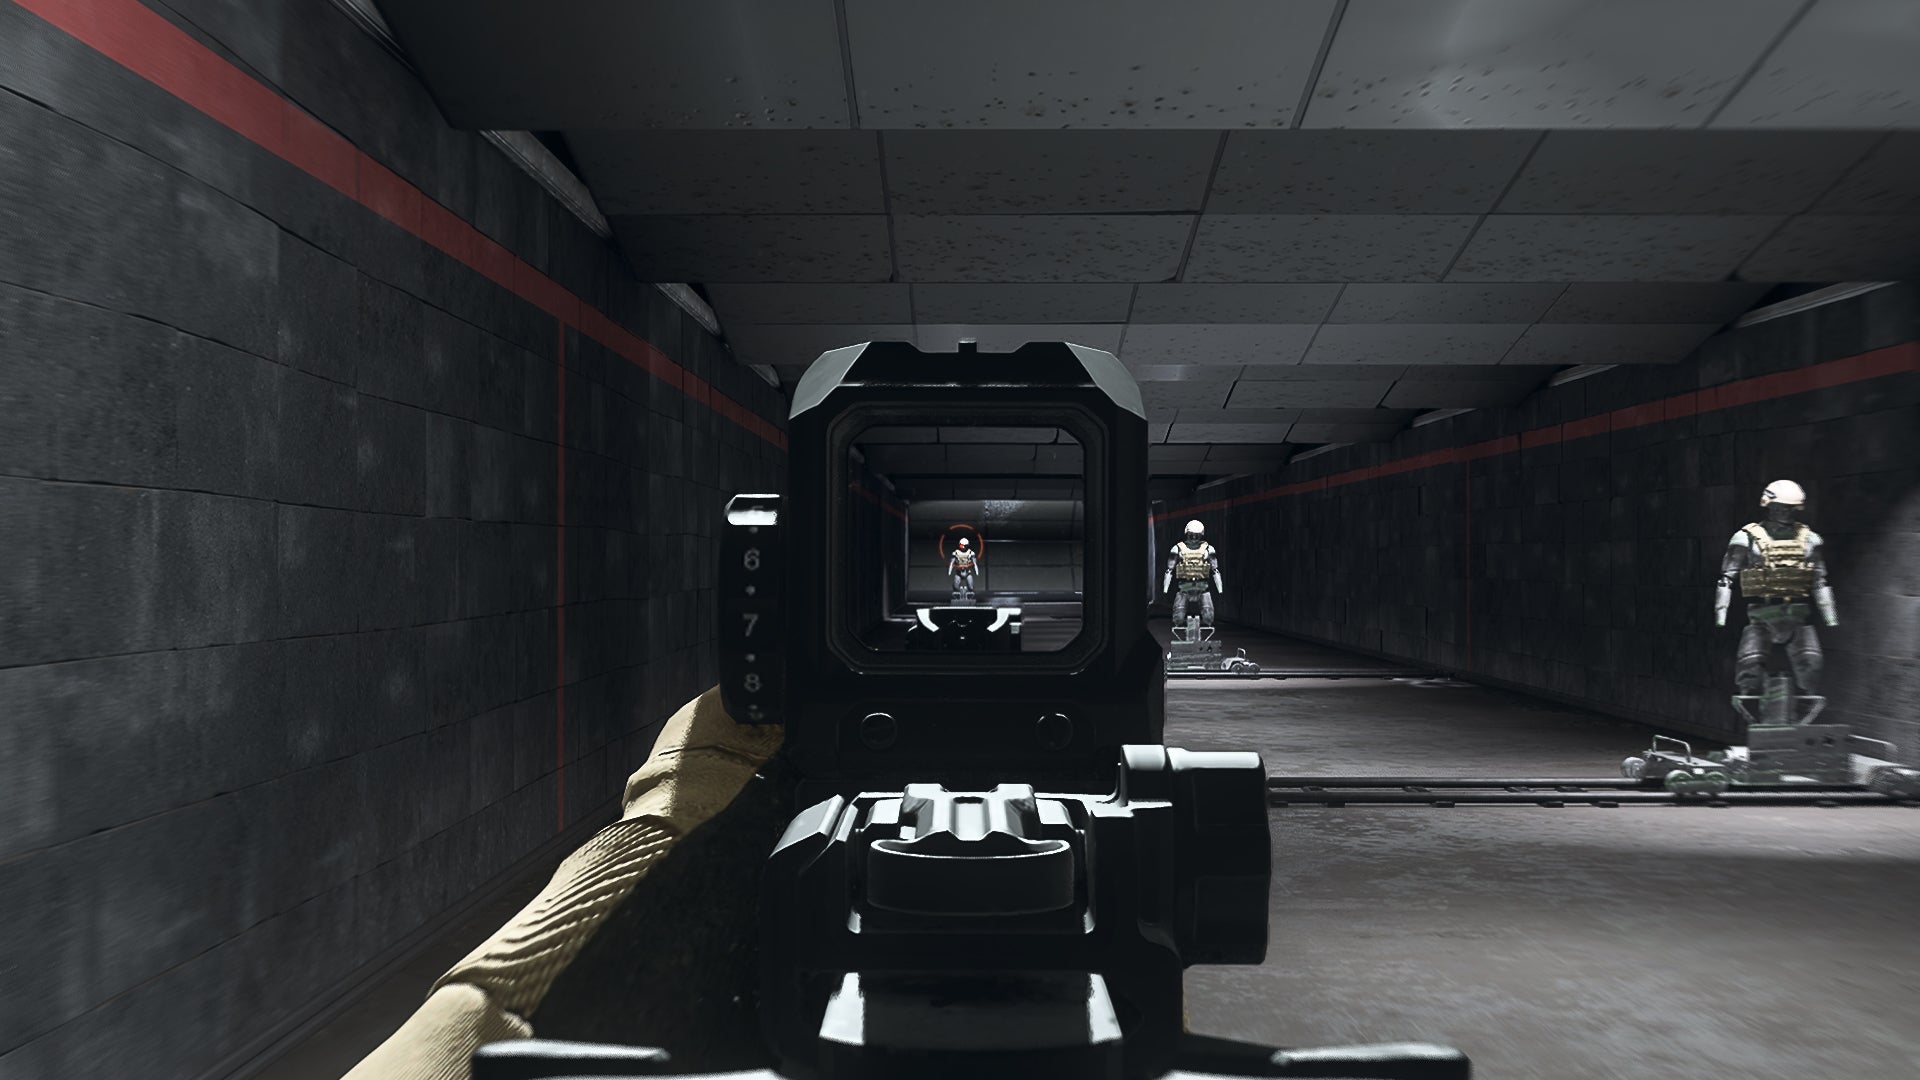 The player in Warzone 2.0 aims at a training dummy using the Corvus Downrange-00 optic attachment.